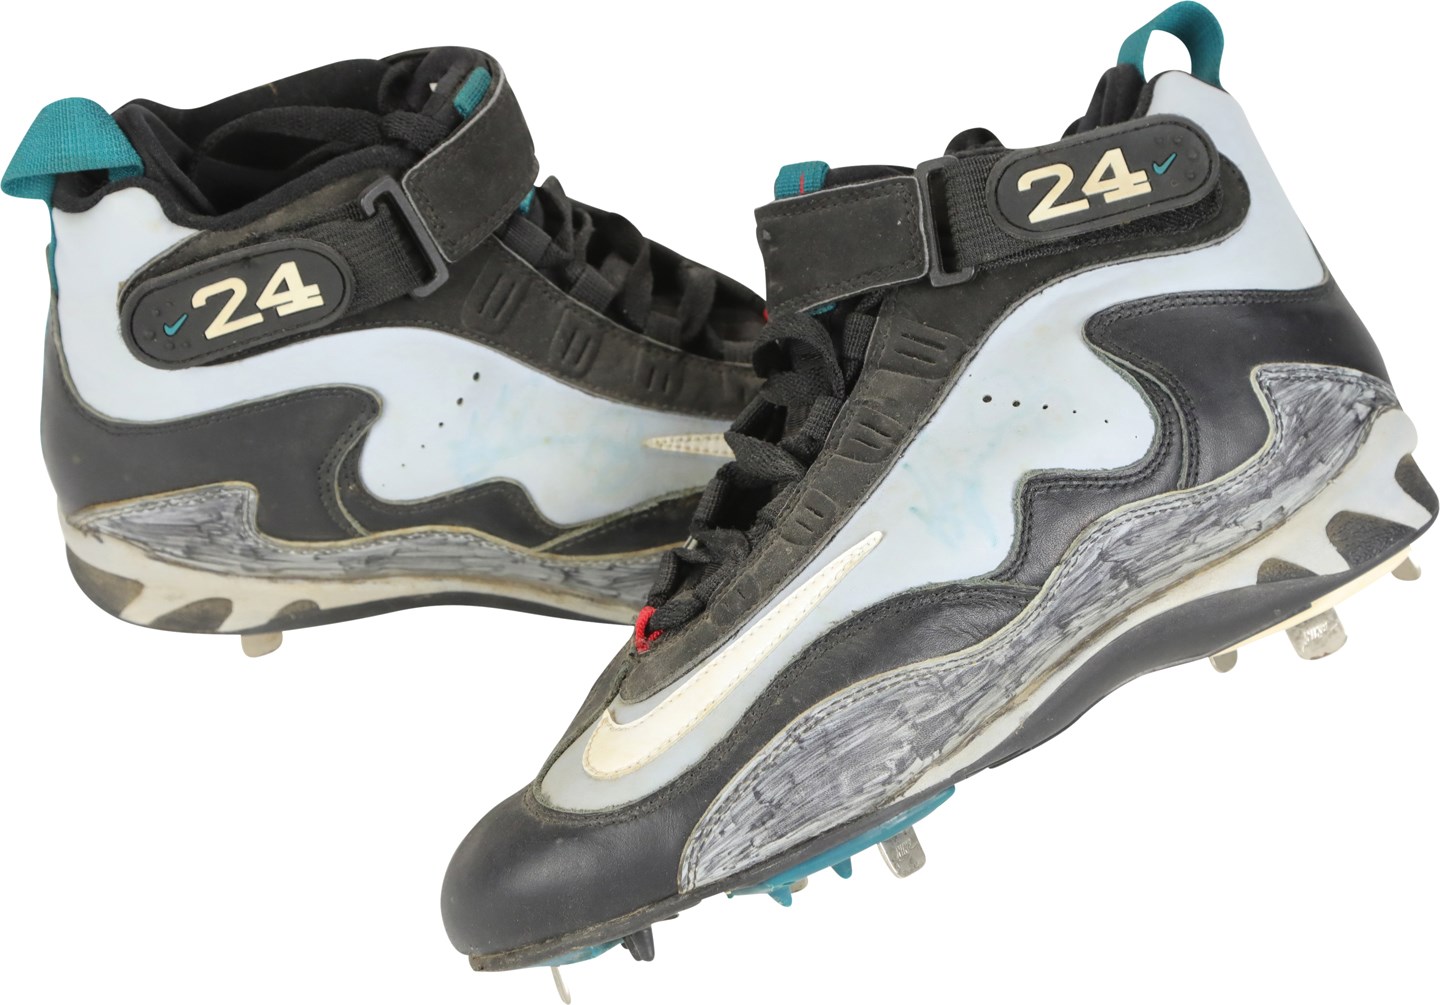 Baseball Equipment - 1996 Ken Griffey Jr. Seattle Mariners Signed Game Used Cleats (PSA)